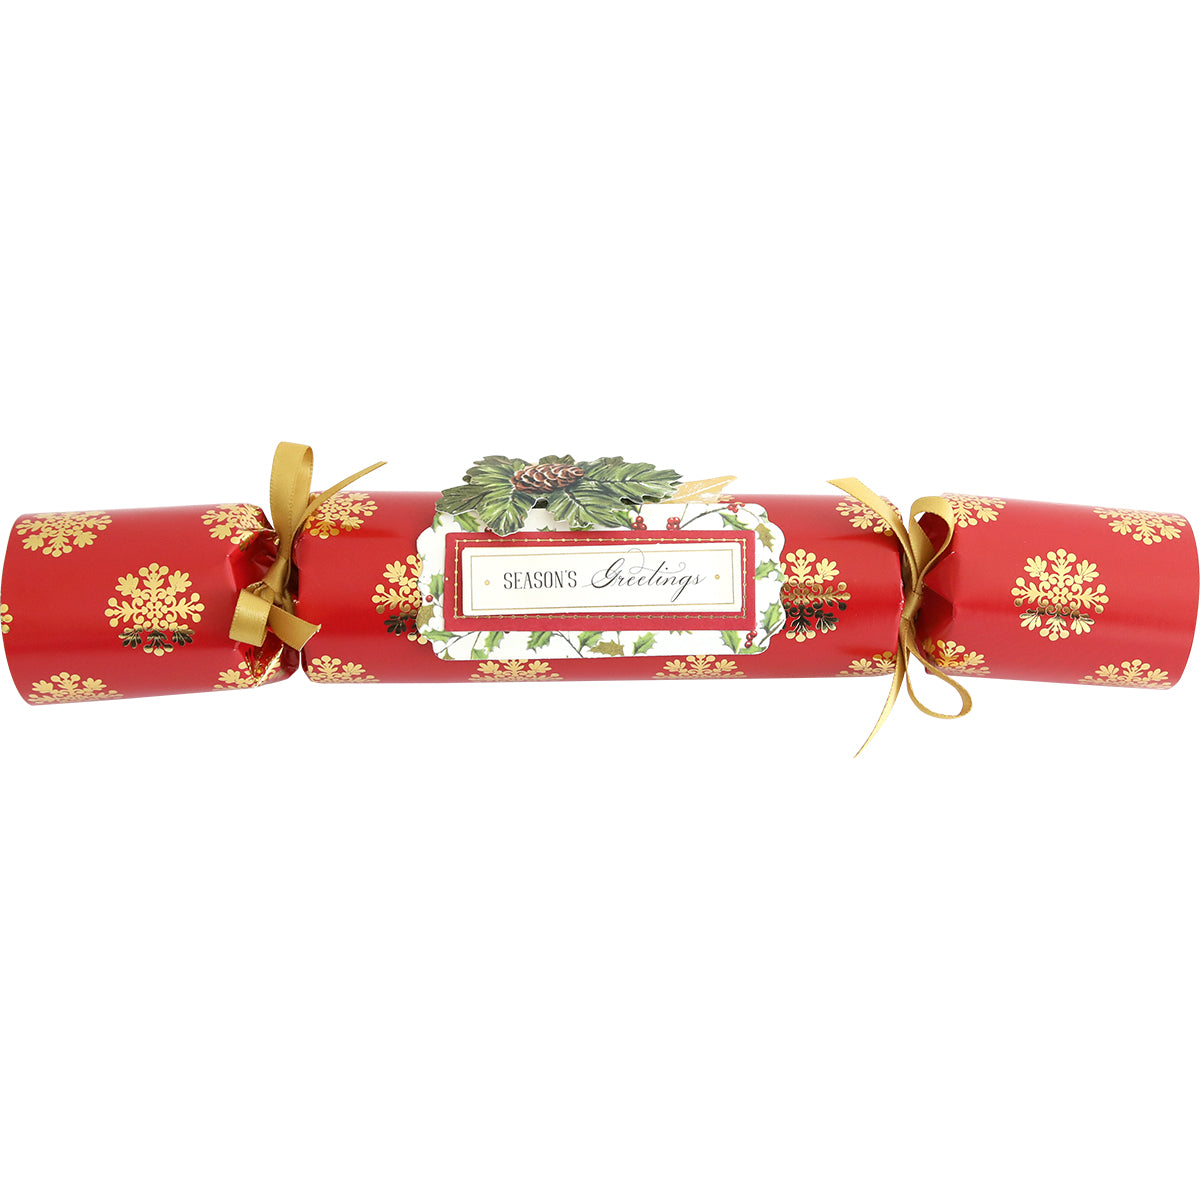 A fun favor for your holiday table decorations - Christmas Crackers Dies adorned with a red ribbon.